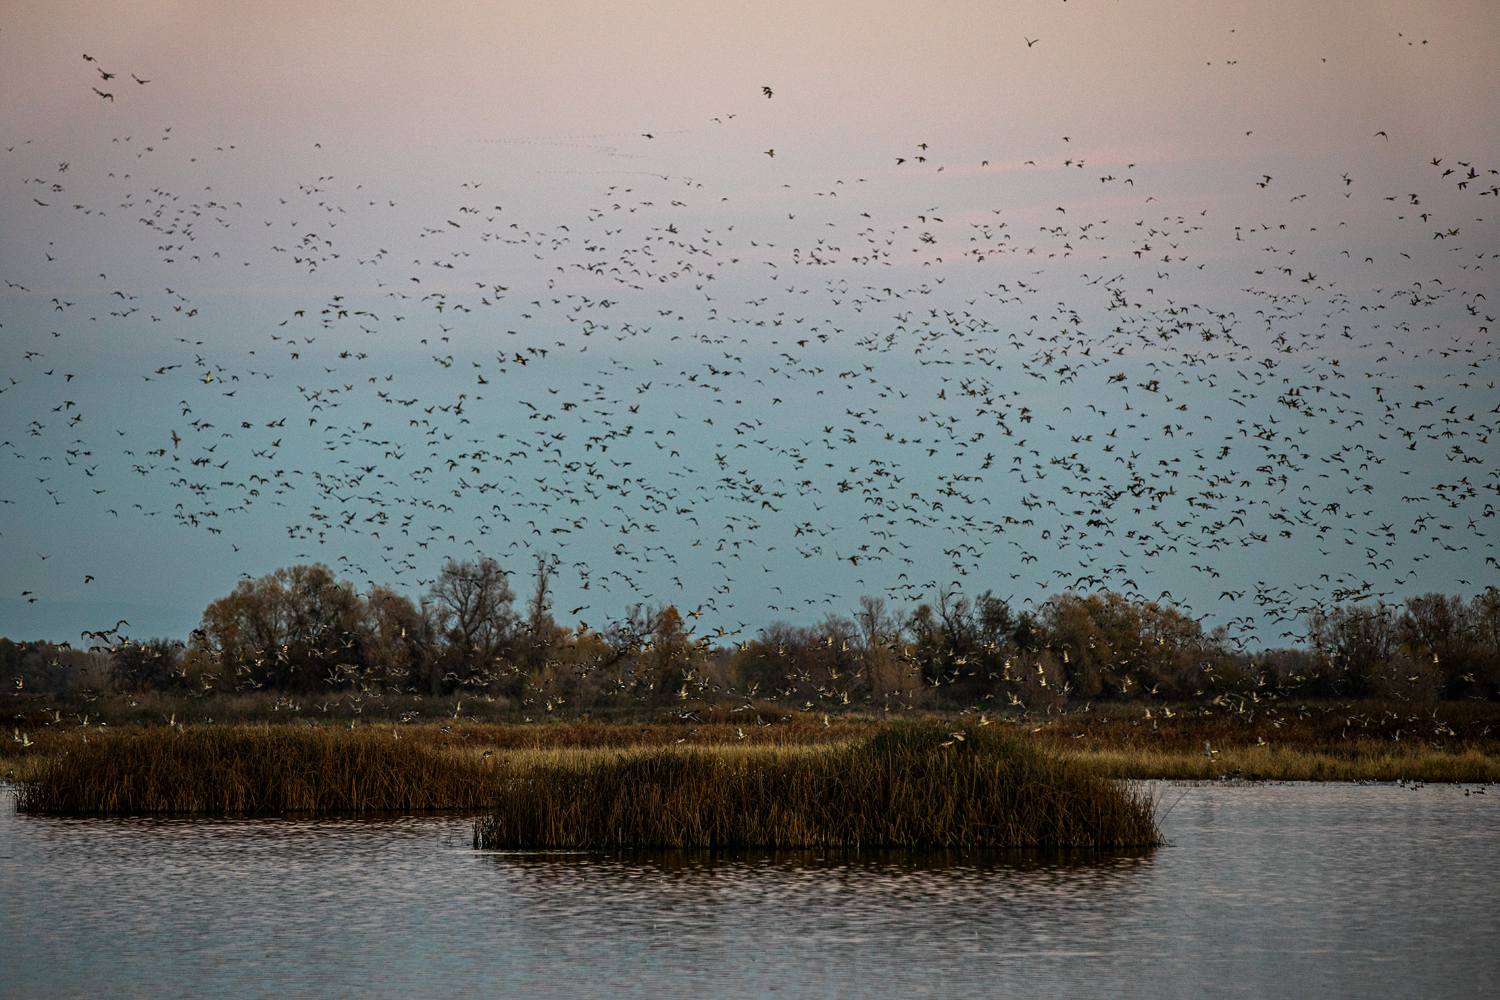 Waterfowl fly over flooded marshy area